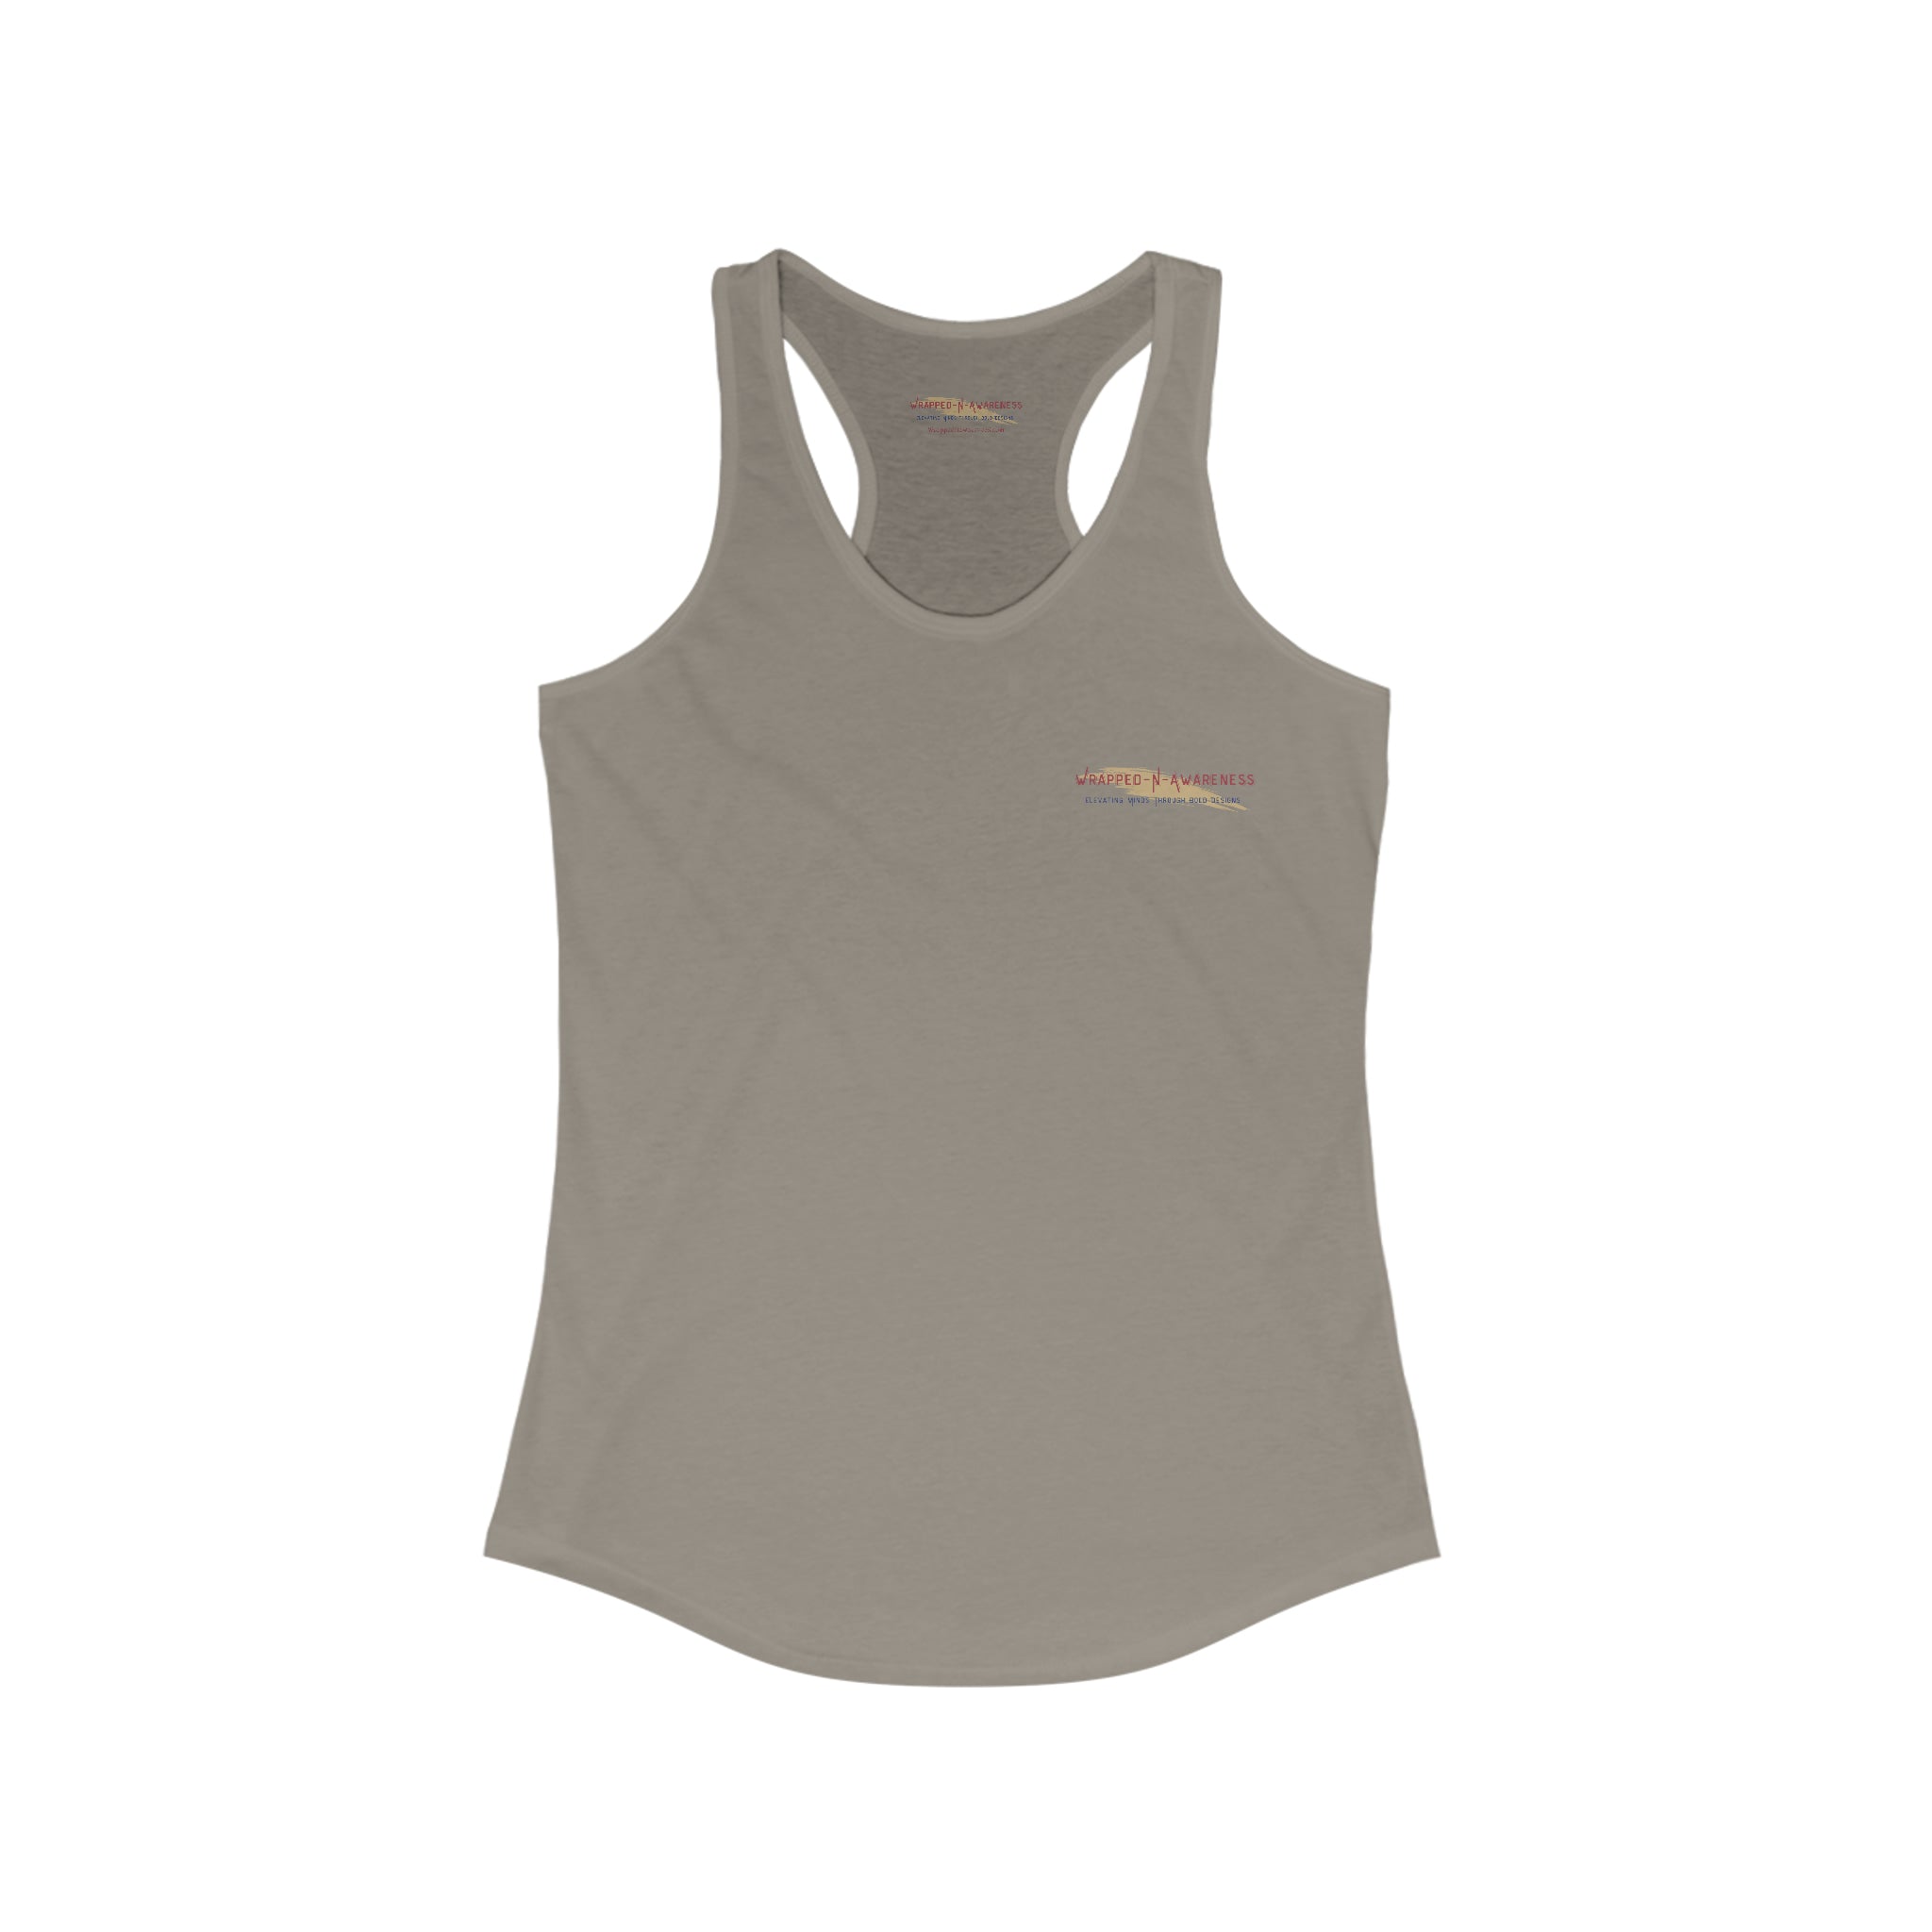 Awareness Racerback Tank: Mental Health Advocacy Solid Warm Gray Activewear Athletic Tank Gym Clothes Performance Tank Racerback Sleeveless Top Sporty Apparel Tank Top Women's Tank Workout Gear Yoga Tank Tank Top 4680286100651063272_2048_abe5990f-02e4-4e5a-9c17-bb4fd00855f7 Printify